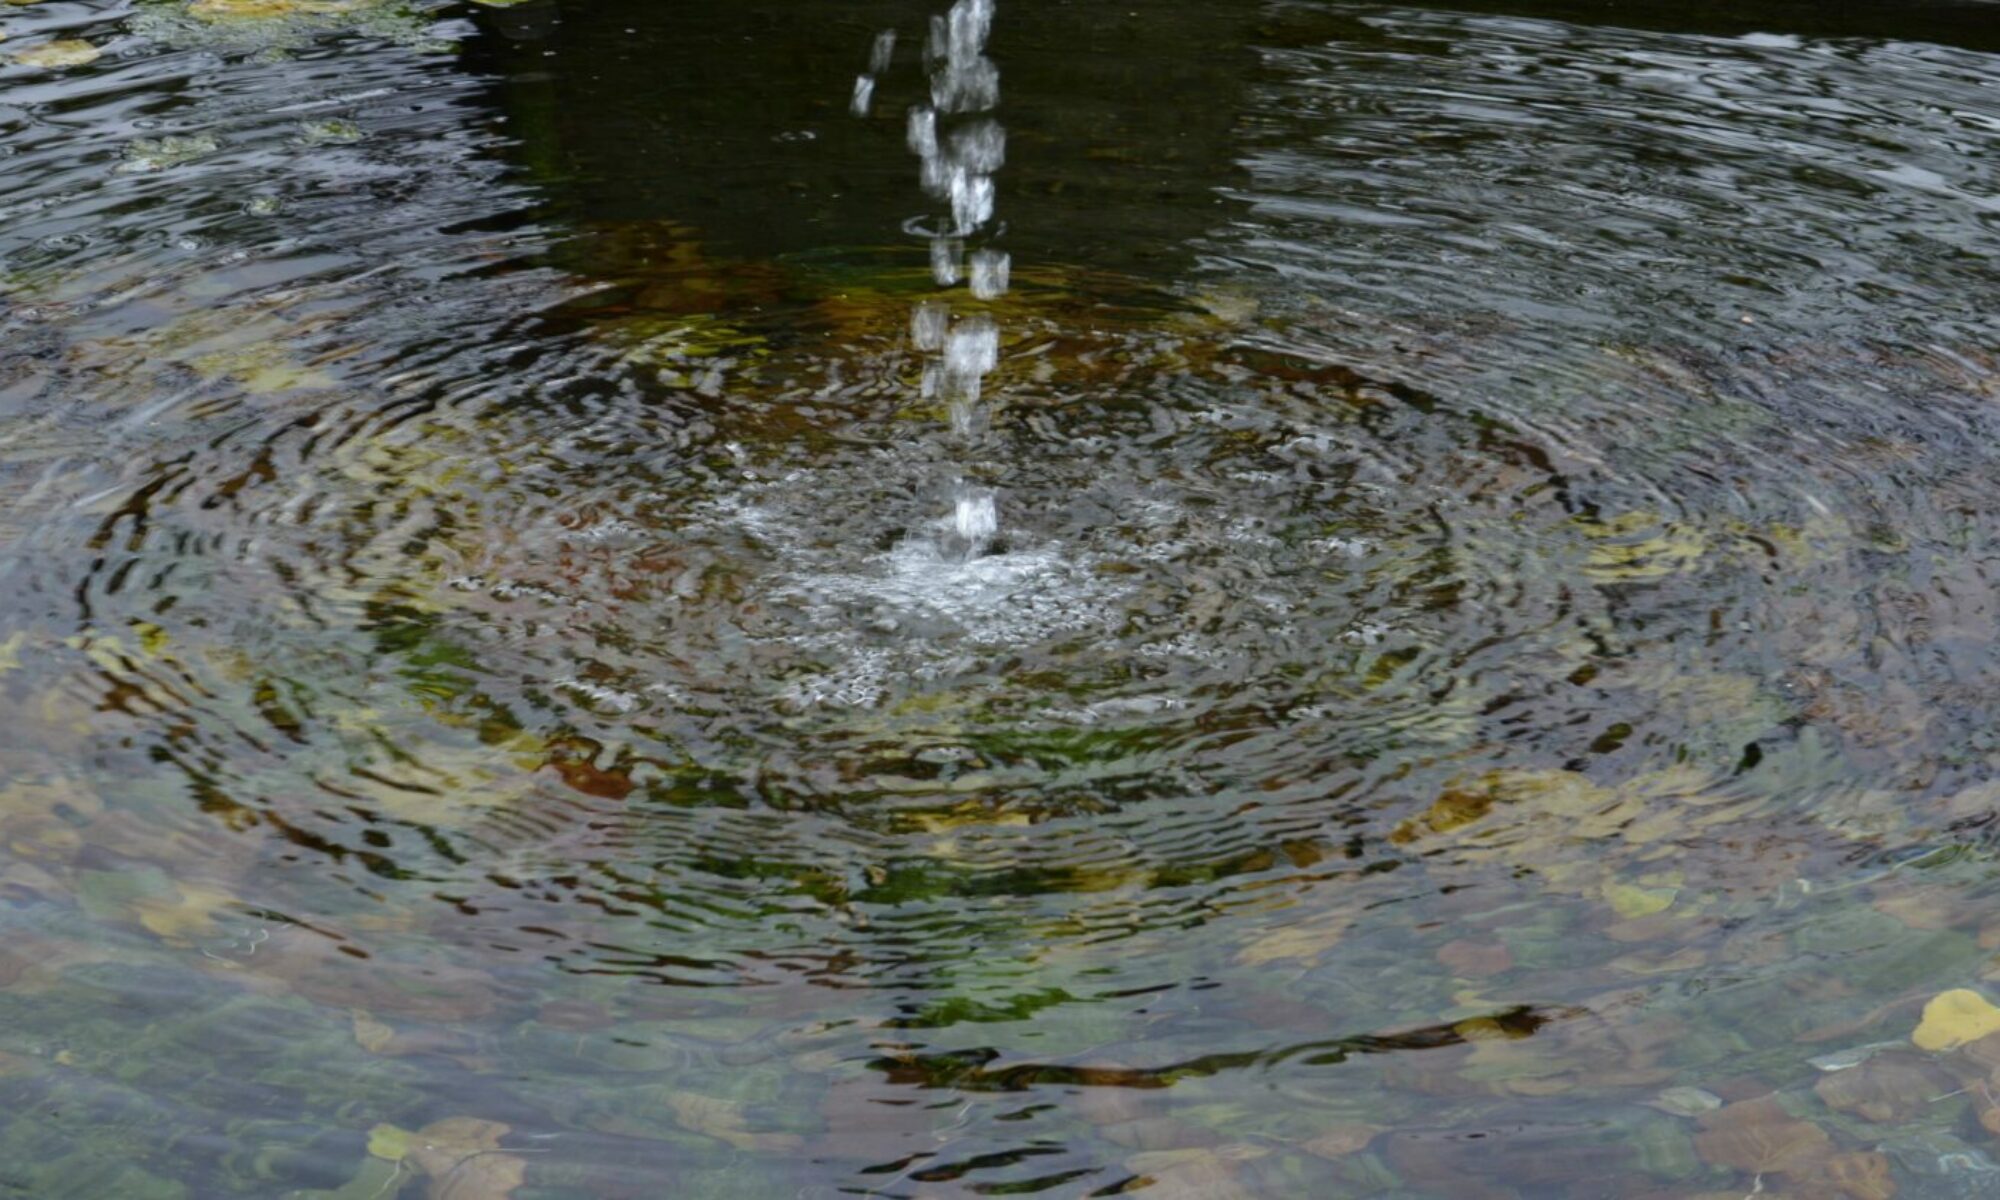 http://www.journos-blotter.com/wp-content/uploads/2021/04/cropped-cropped-Fountain-1.jpg